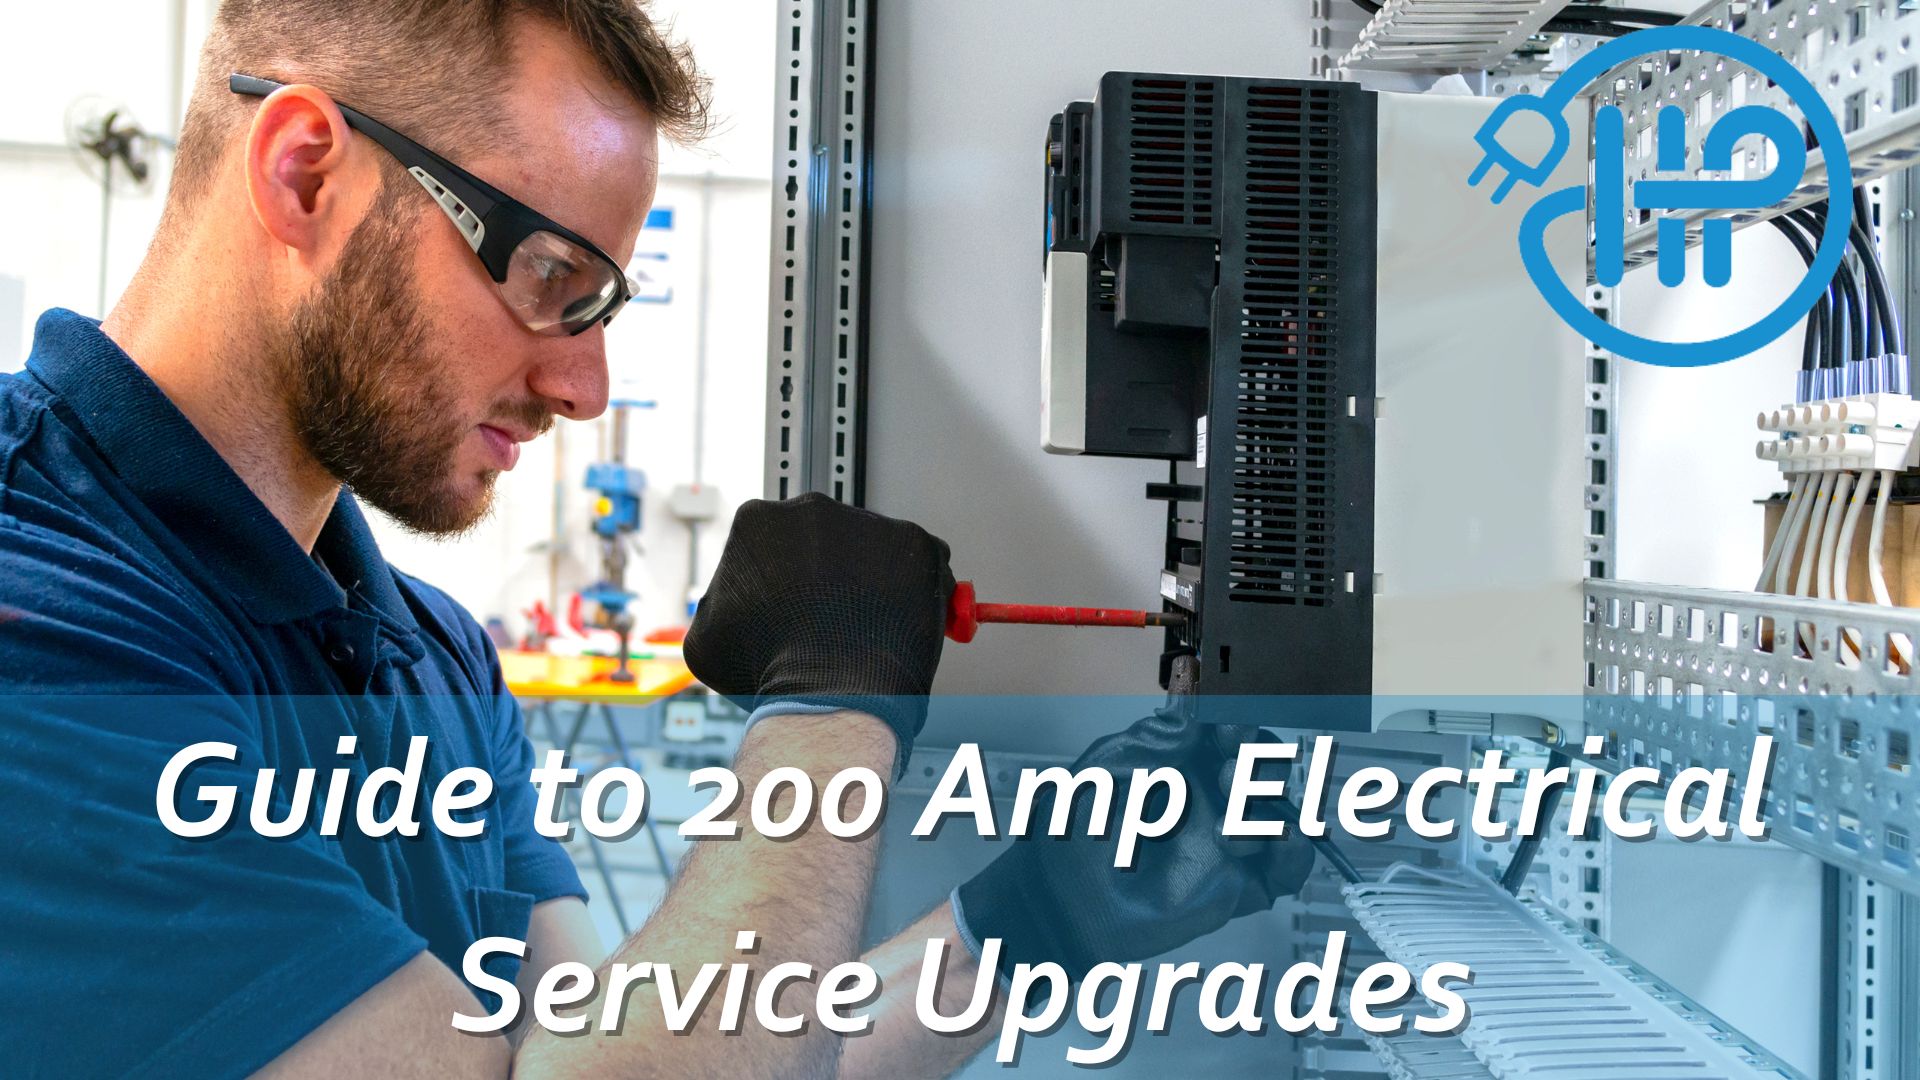 Guide to 200 Amp Electrical Service Upgrades